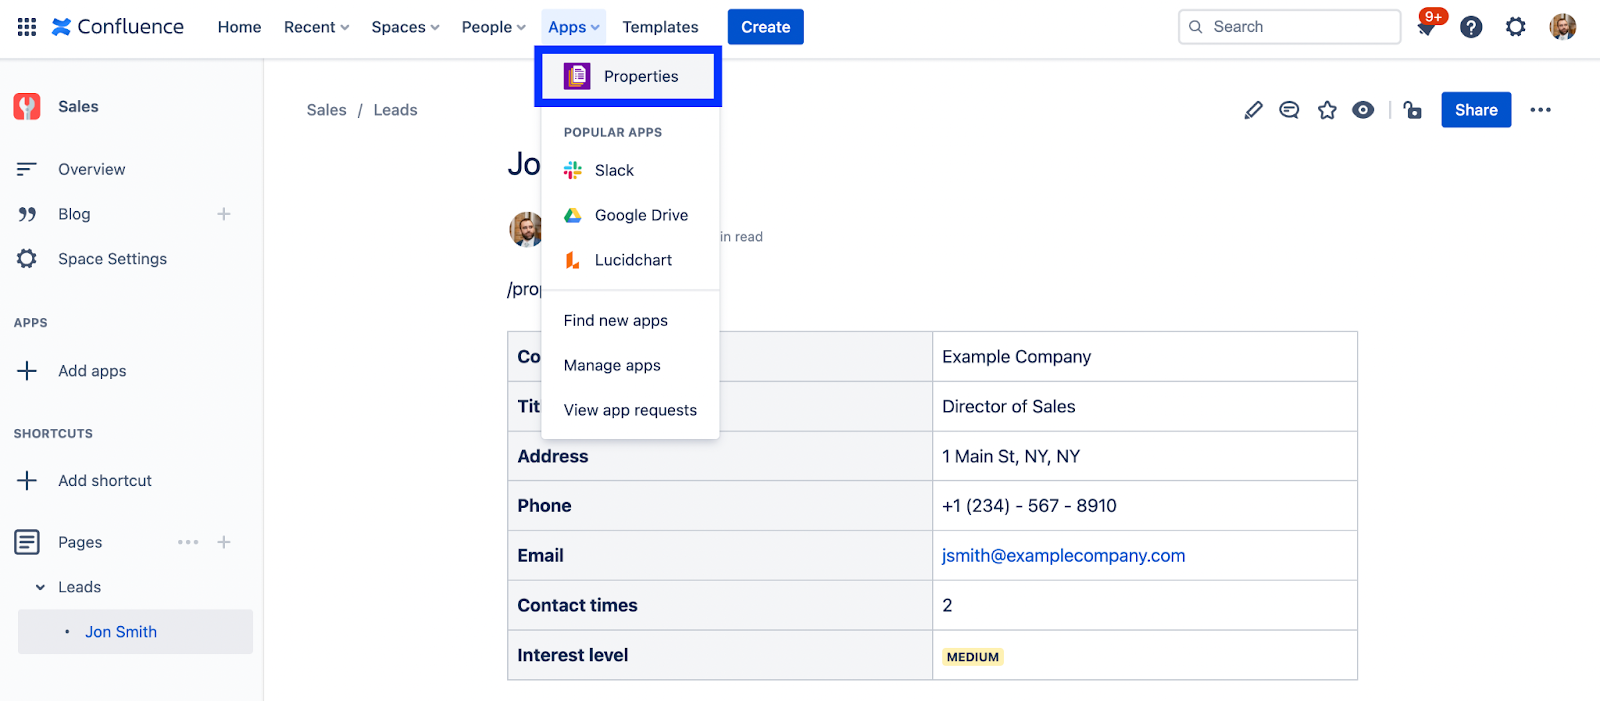 Keep Your Customer Data in one place in Confluence Cloud - Confluence and properties as a CRM